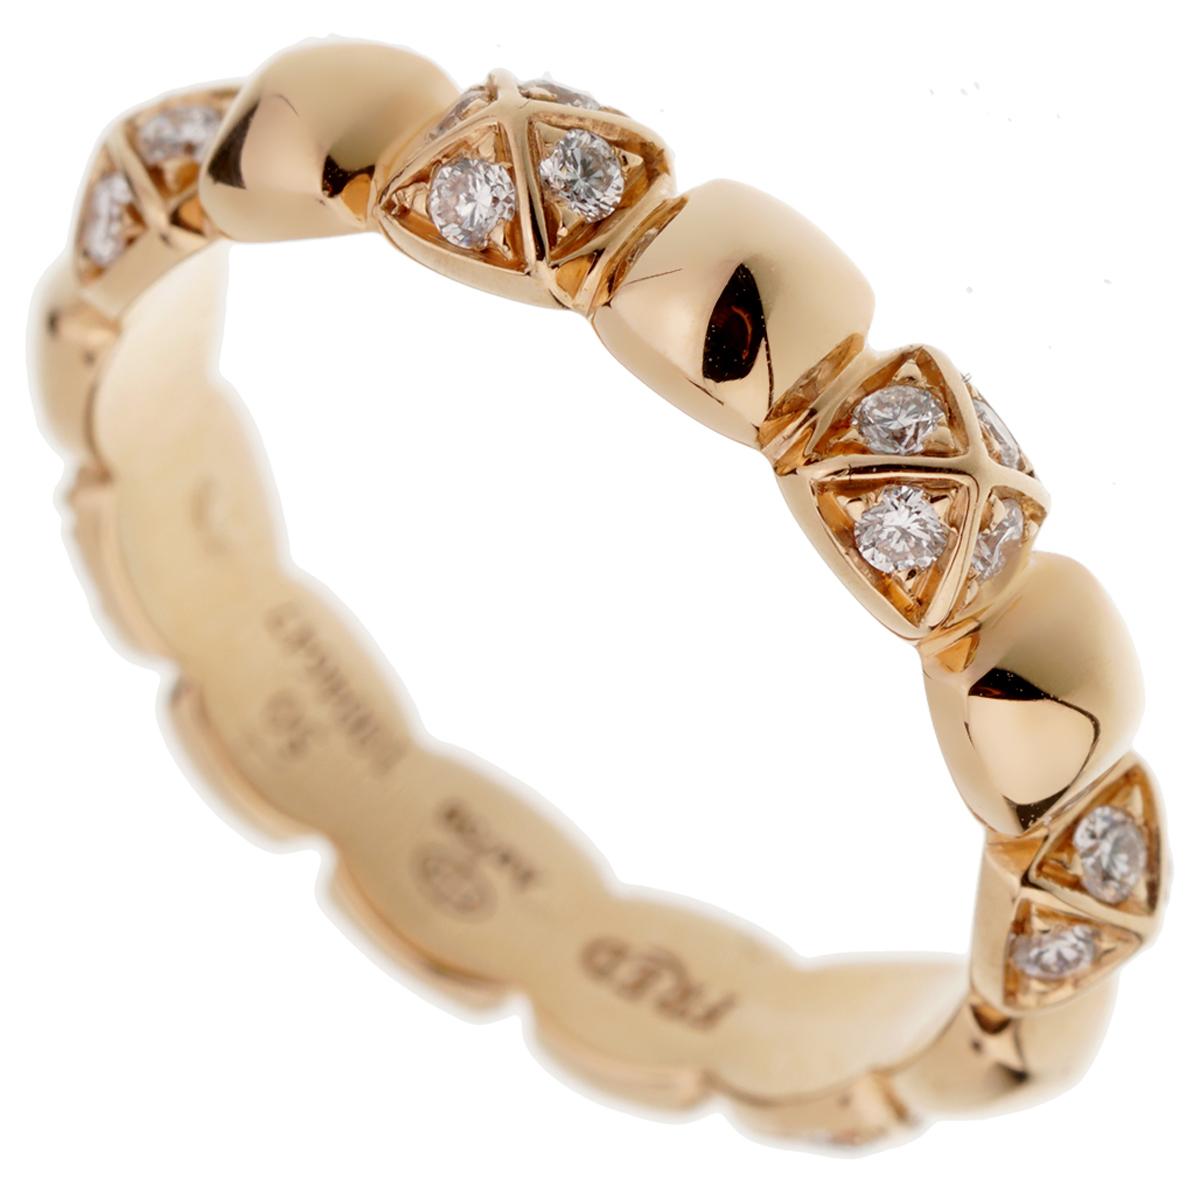 A chic Fred of Paris eternity ring showcasing alternating diamond pyramids adorned with .34ct of the finest round brilliant cut diamonds set in 18k rose gold.

Size 5